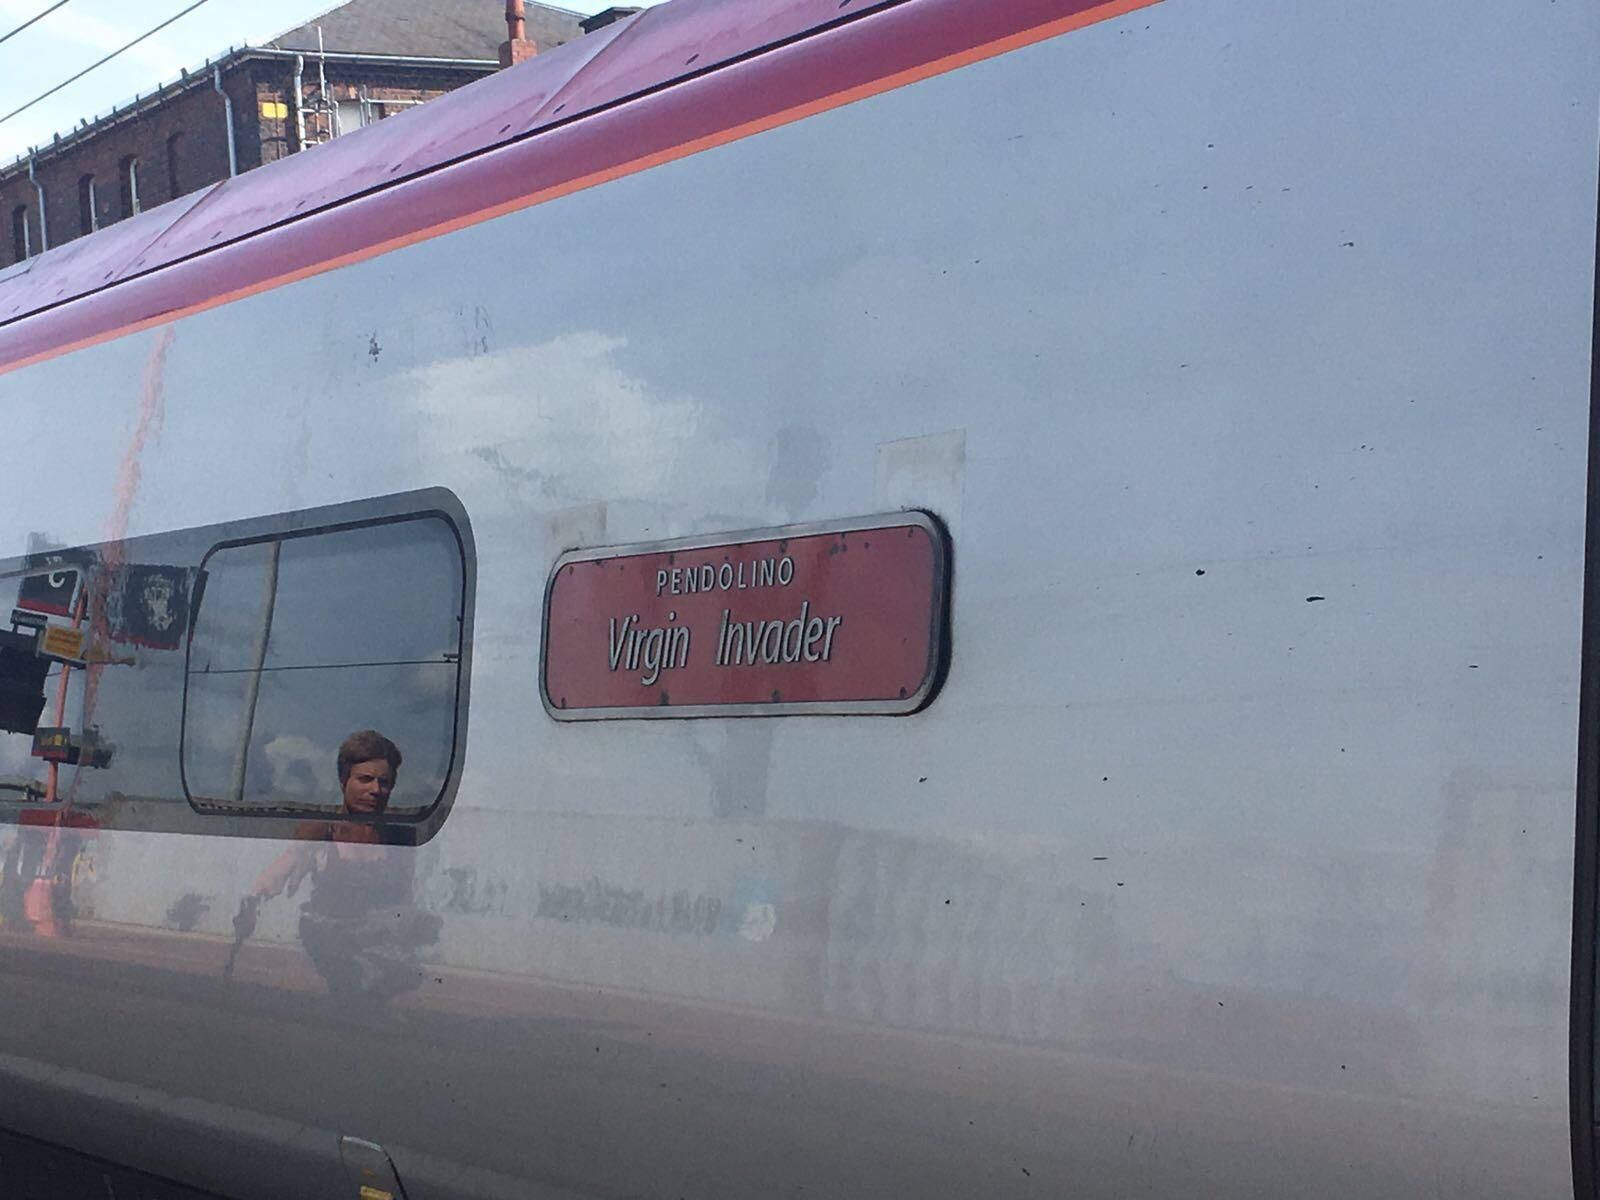 This train's name sounds like an 12 year old's Xbox gamertag